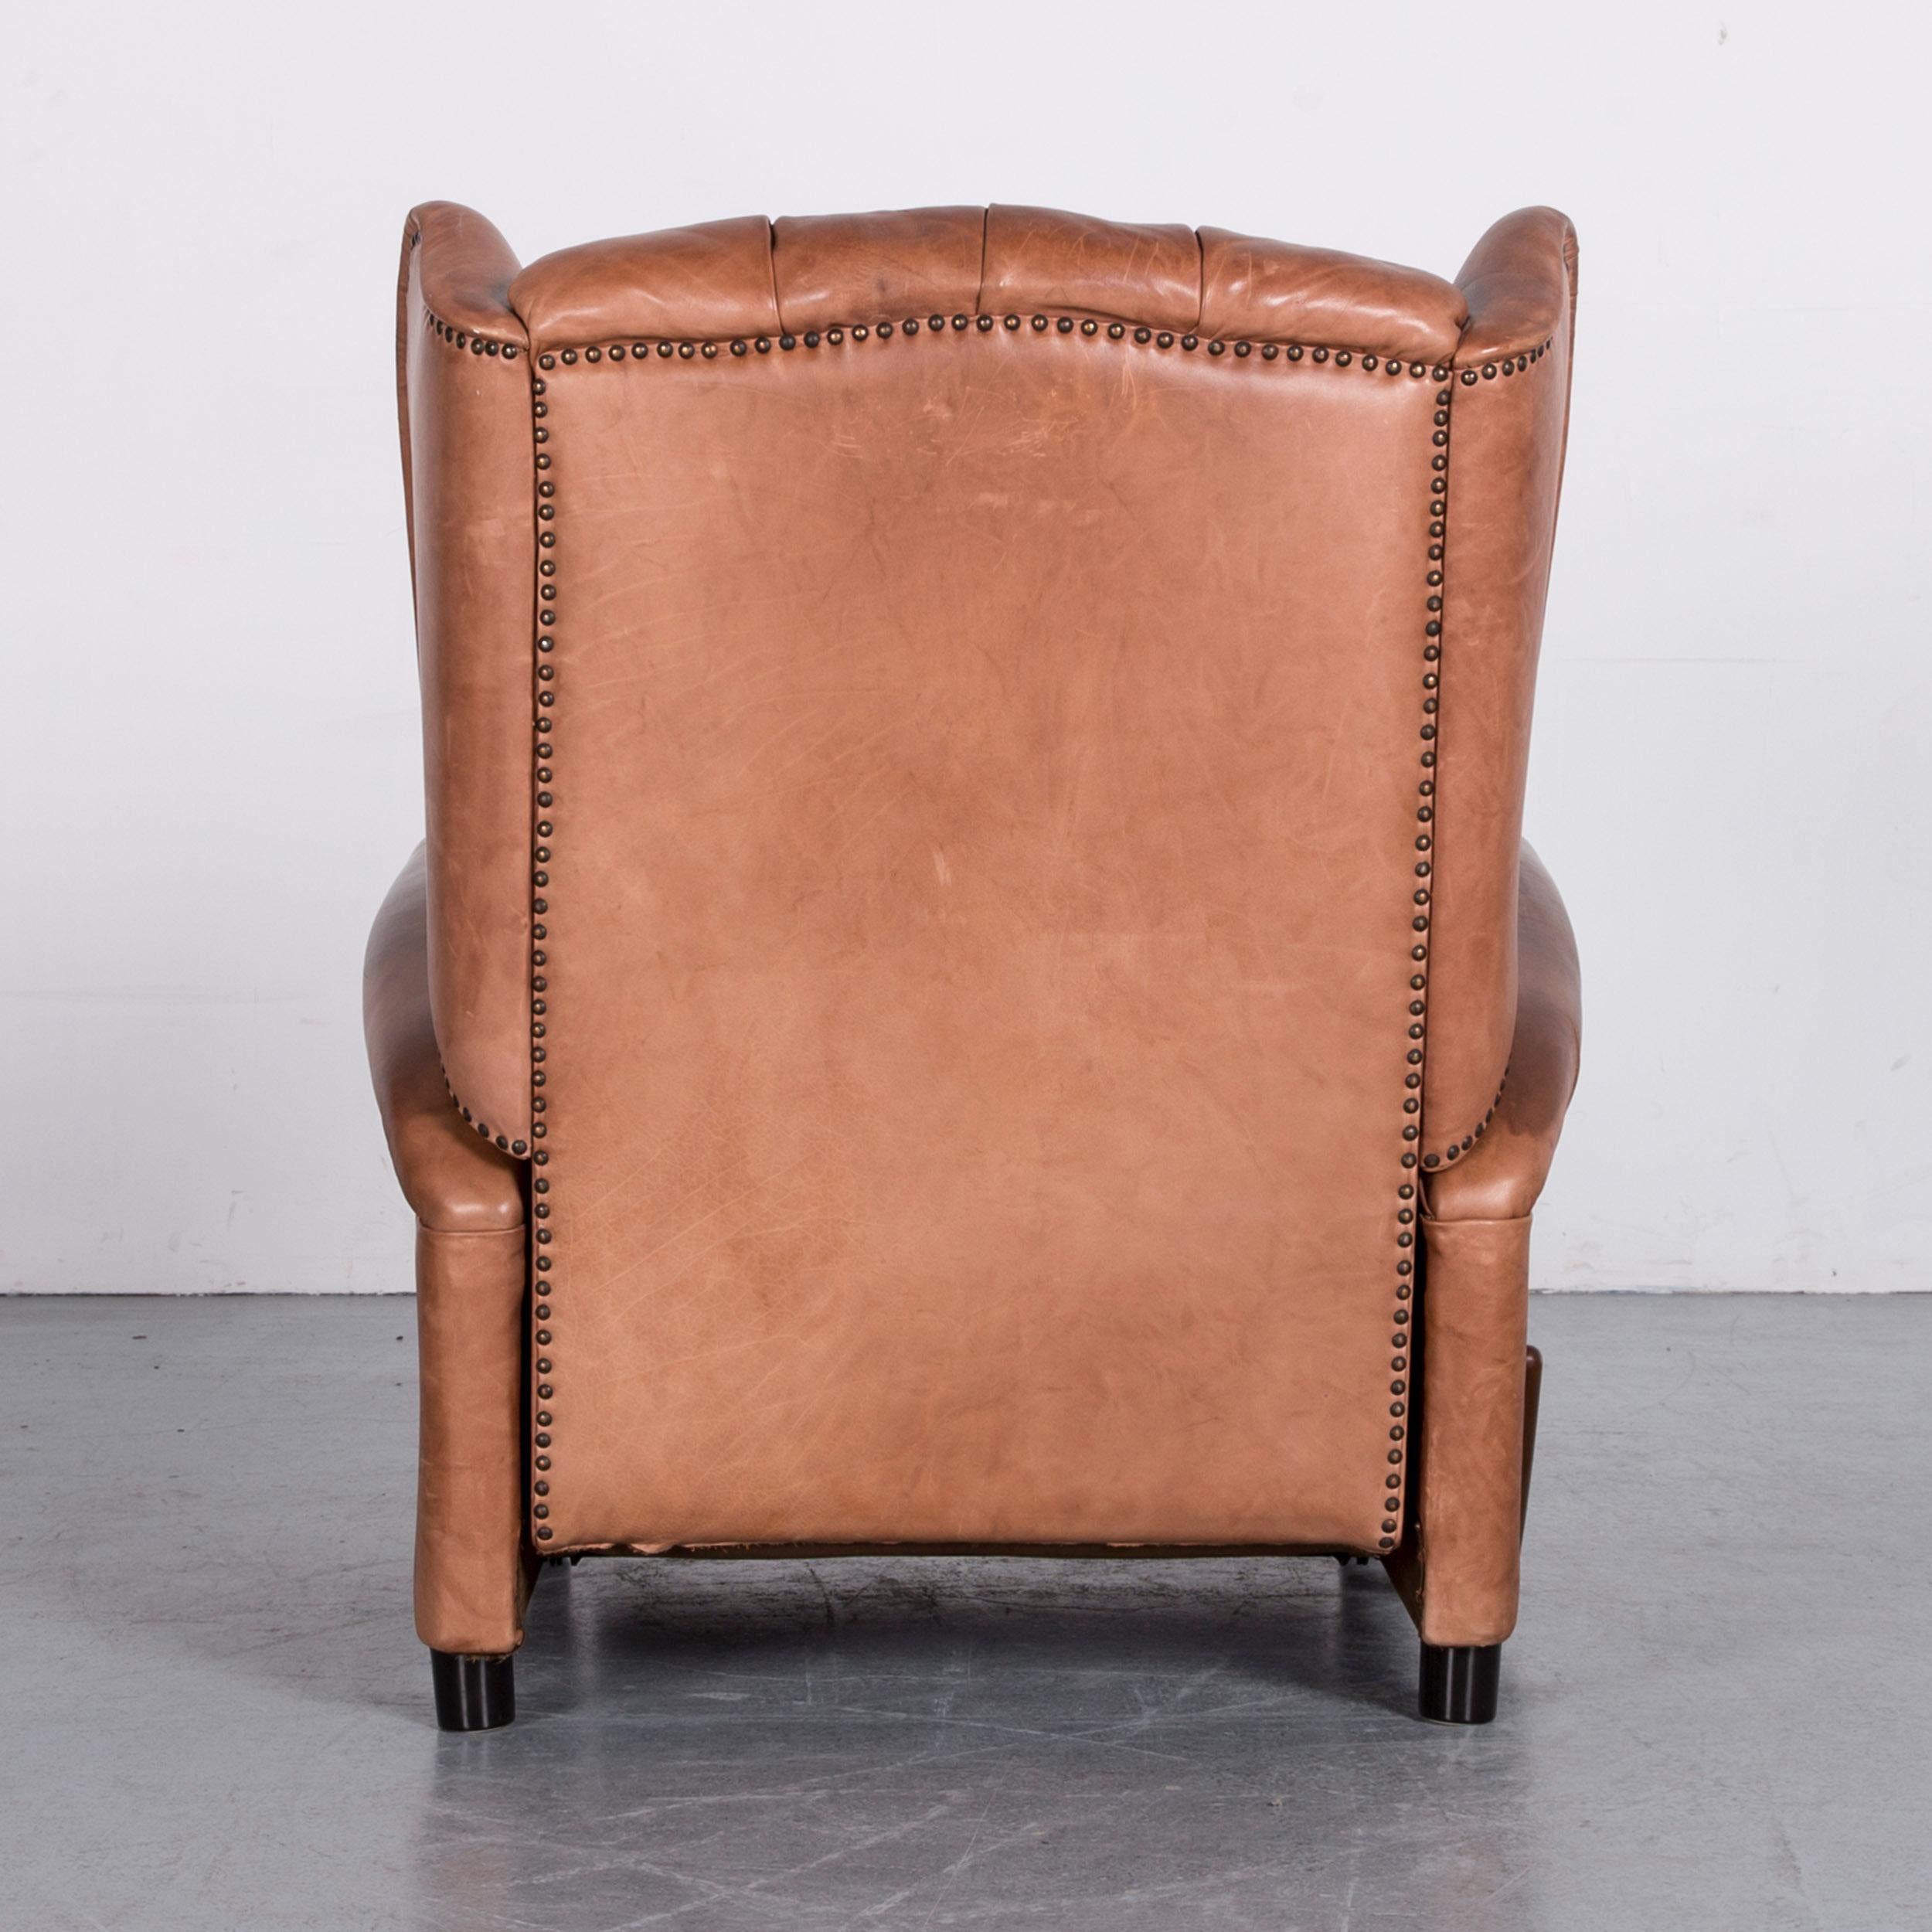 Chesterfield Leather Armchair Brown One-Seat Vintage Retro with Relax Function 8